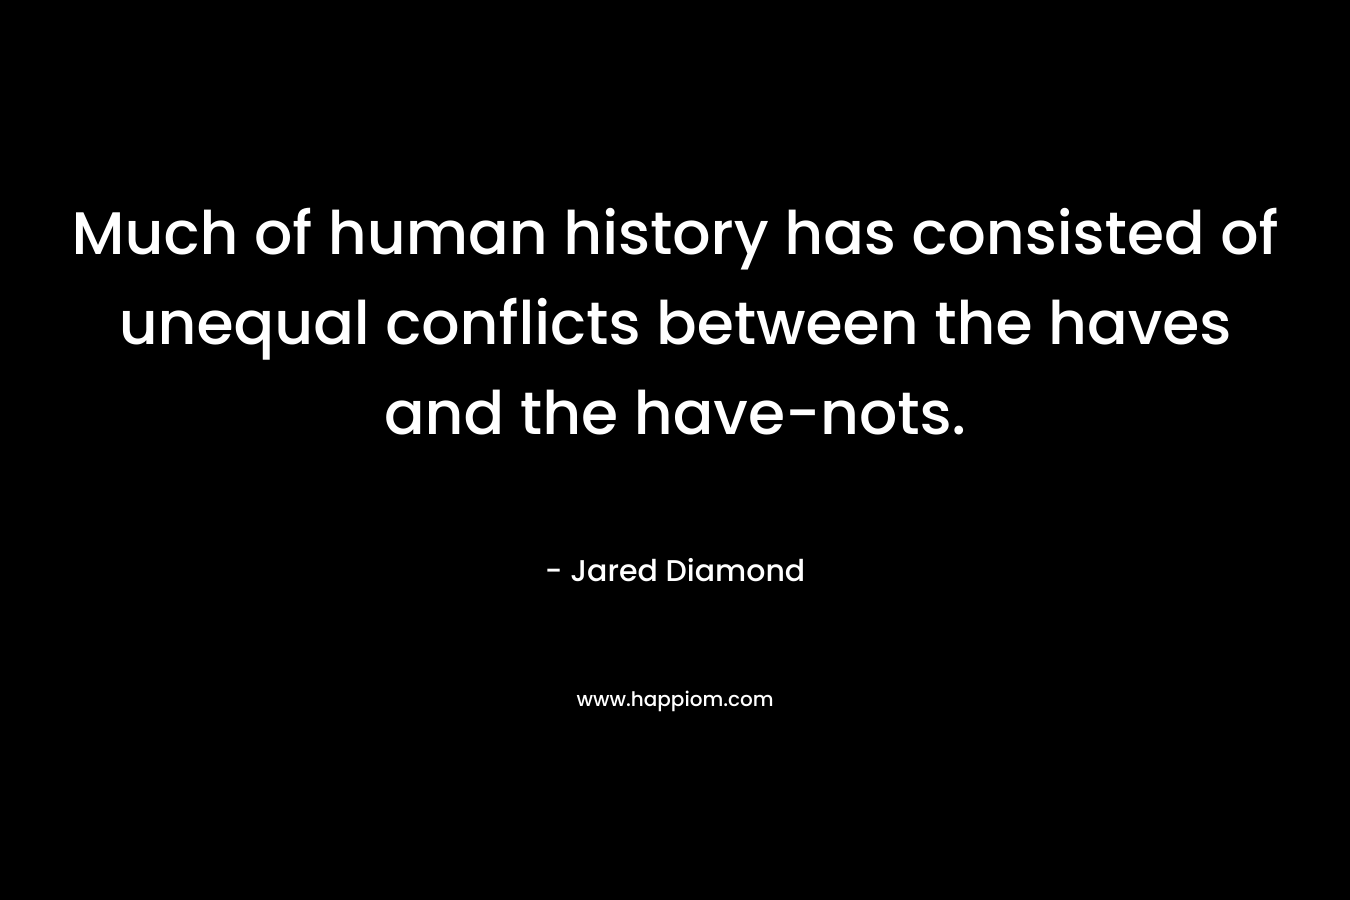 Much of human history has consisted of unequal conflicts between the haves and the have-nots. – Jared Diamond